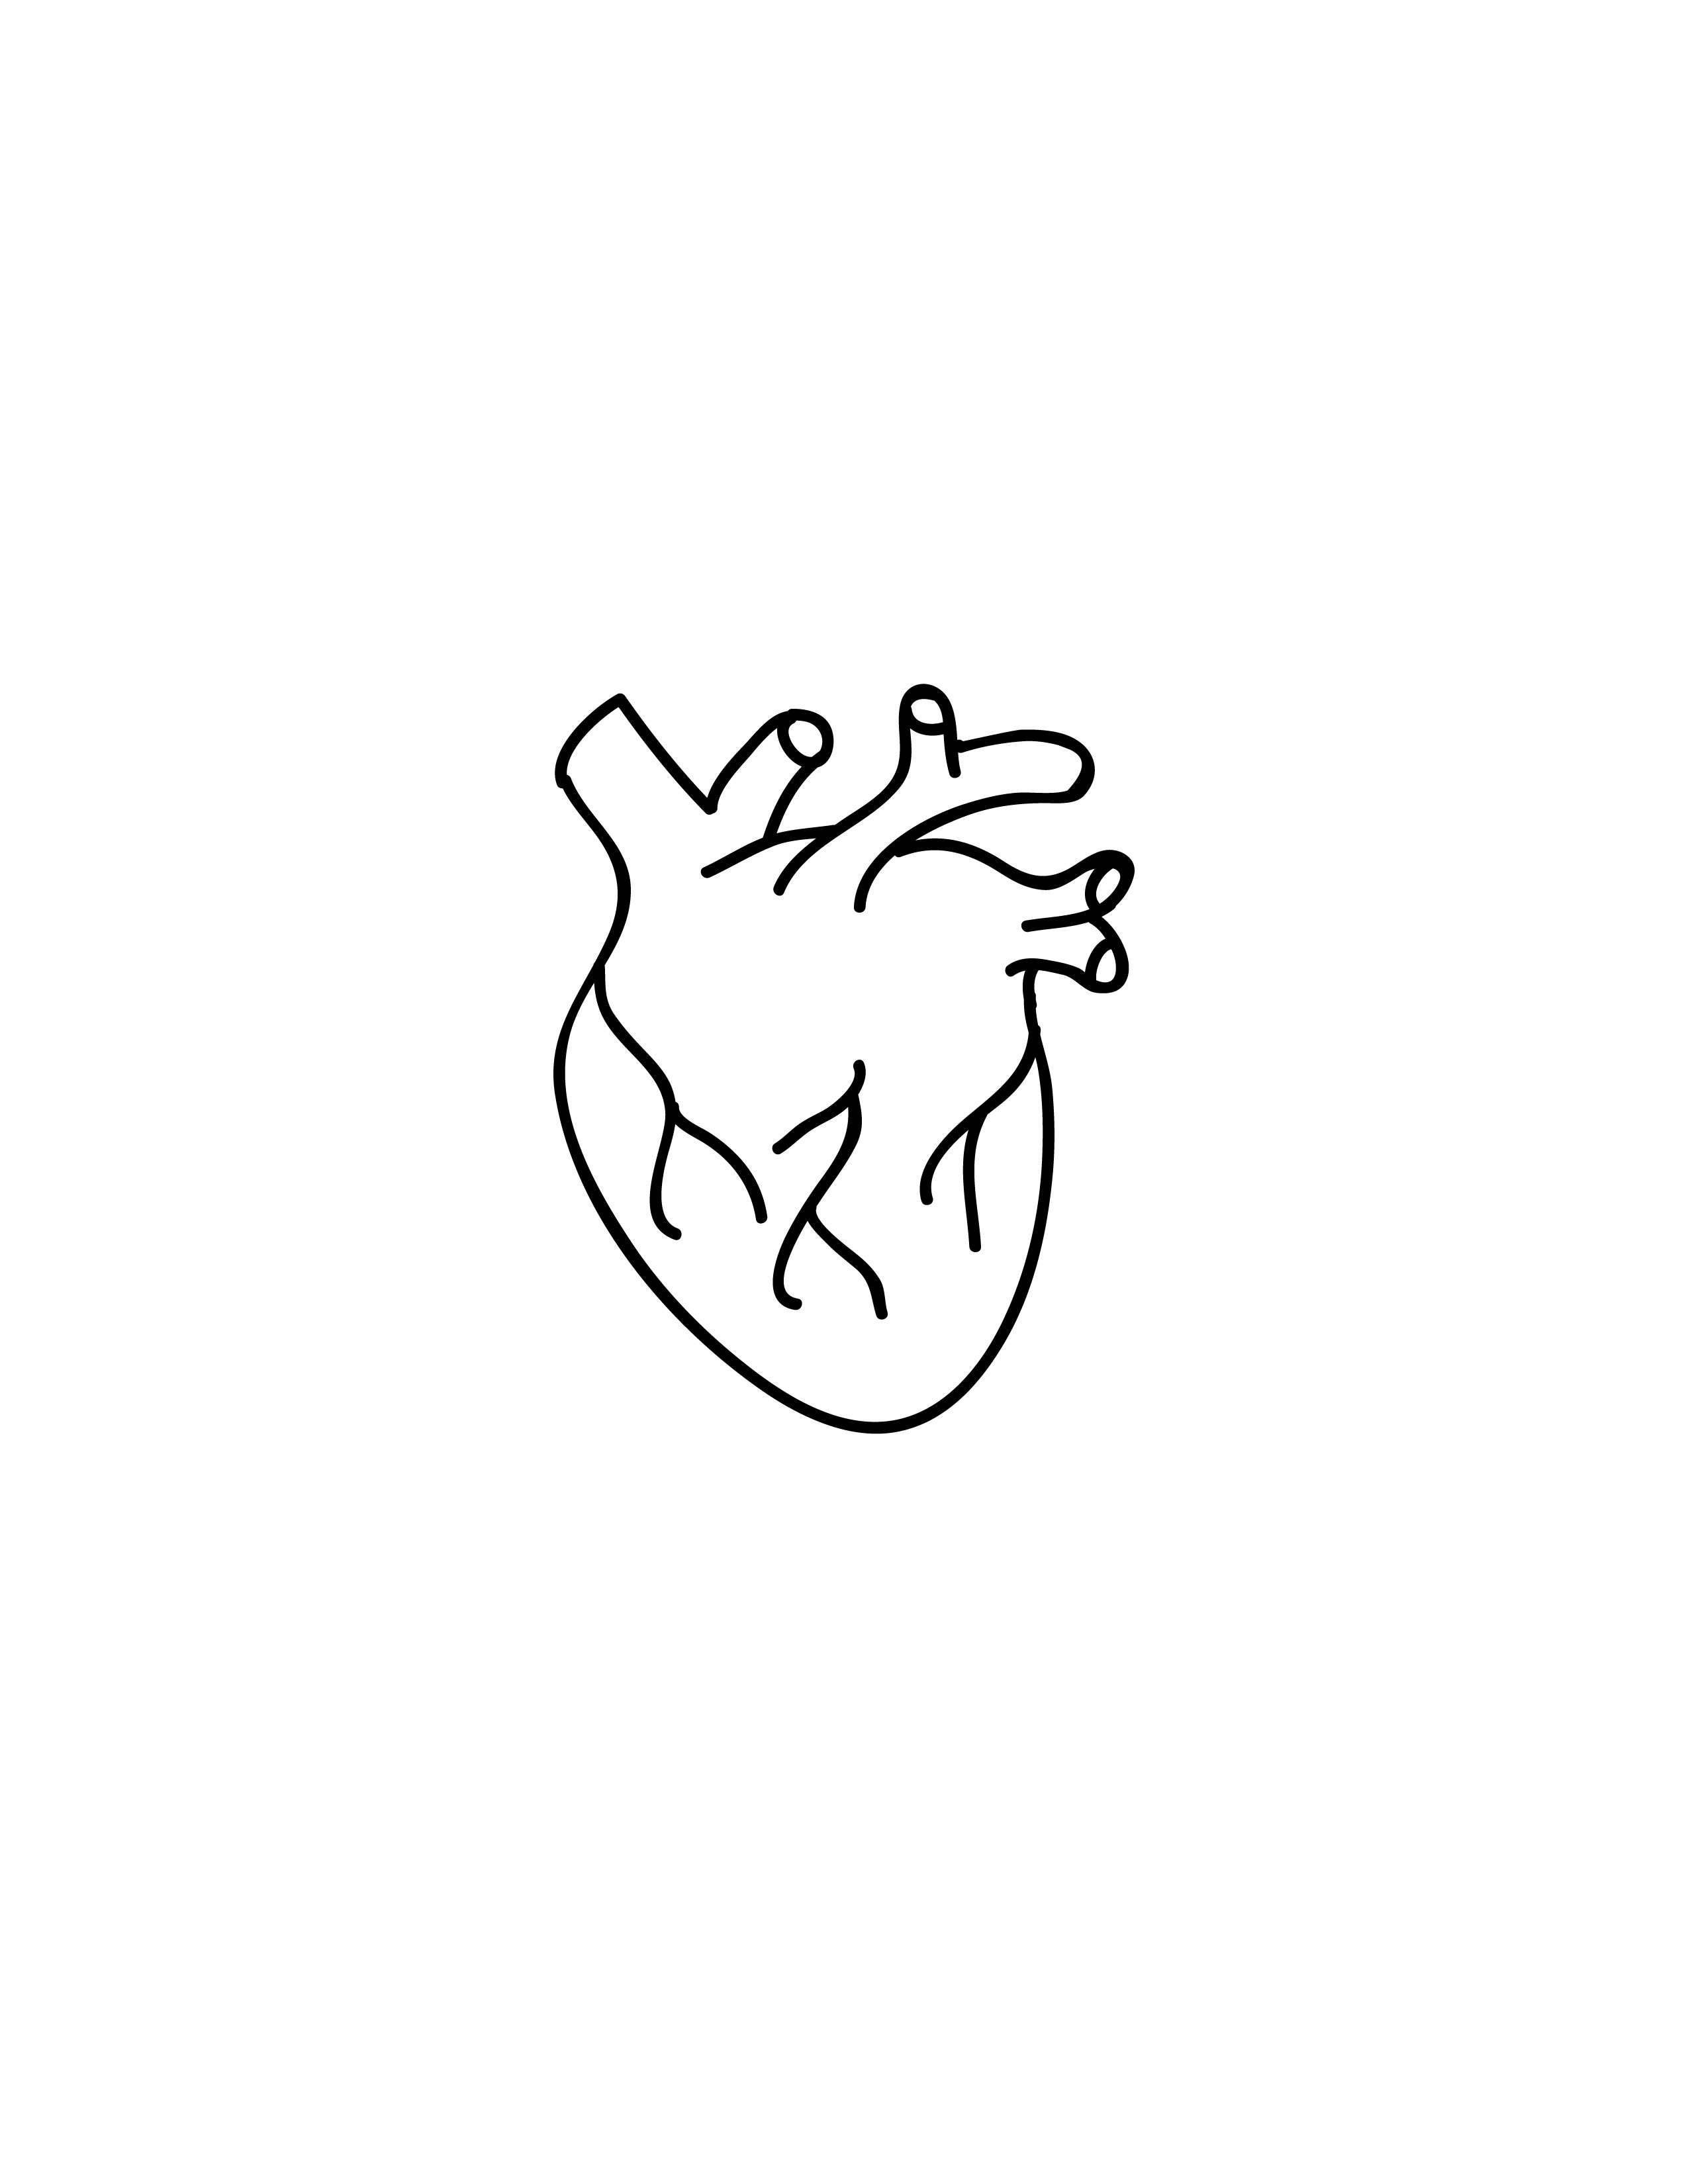 Free Simple Anatomical Heart Drawing Download in PDF, Illustrator